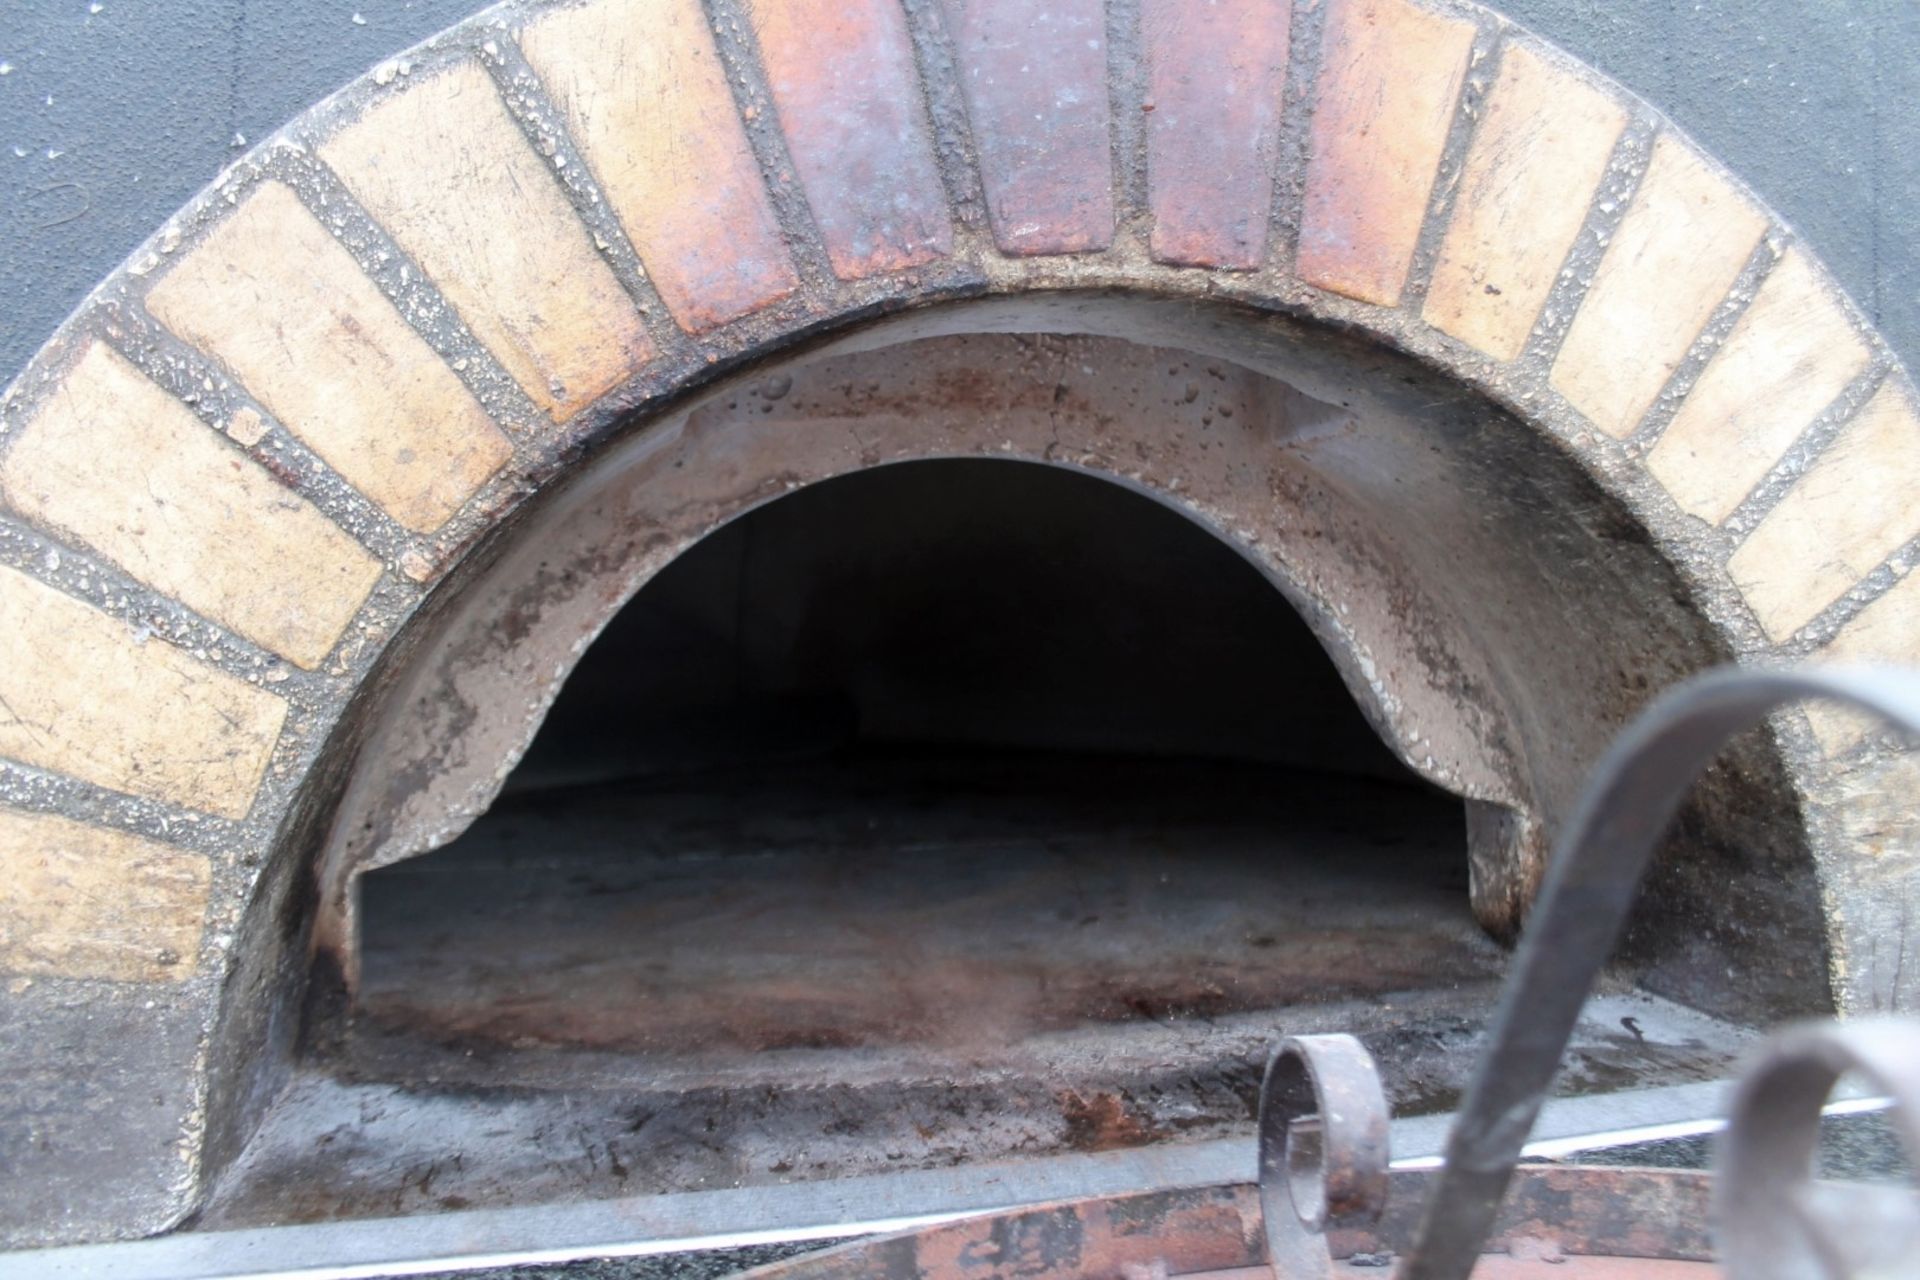 1 x MAM Firedome Commercial Stone Baked Gas Pizza Oven - Made in Italy - Type Modular Fire E - - Image 3 of 8